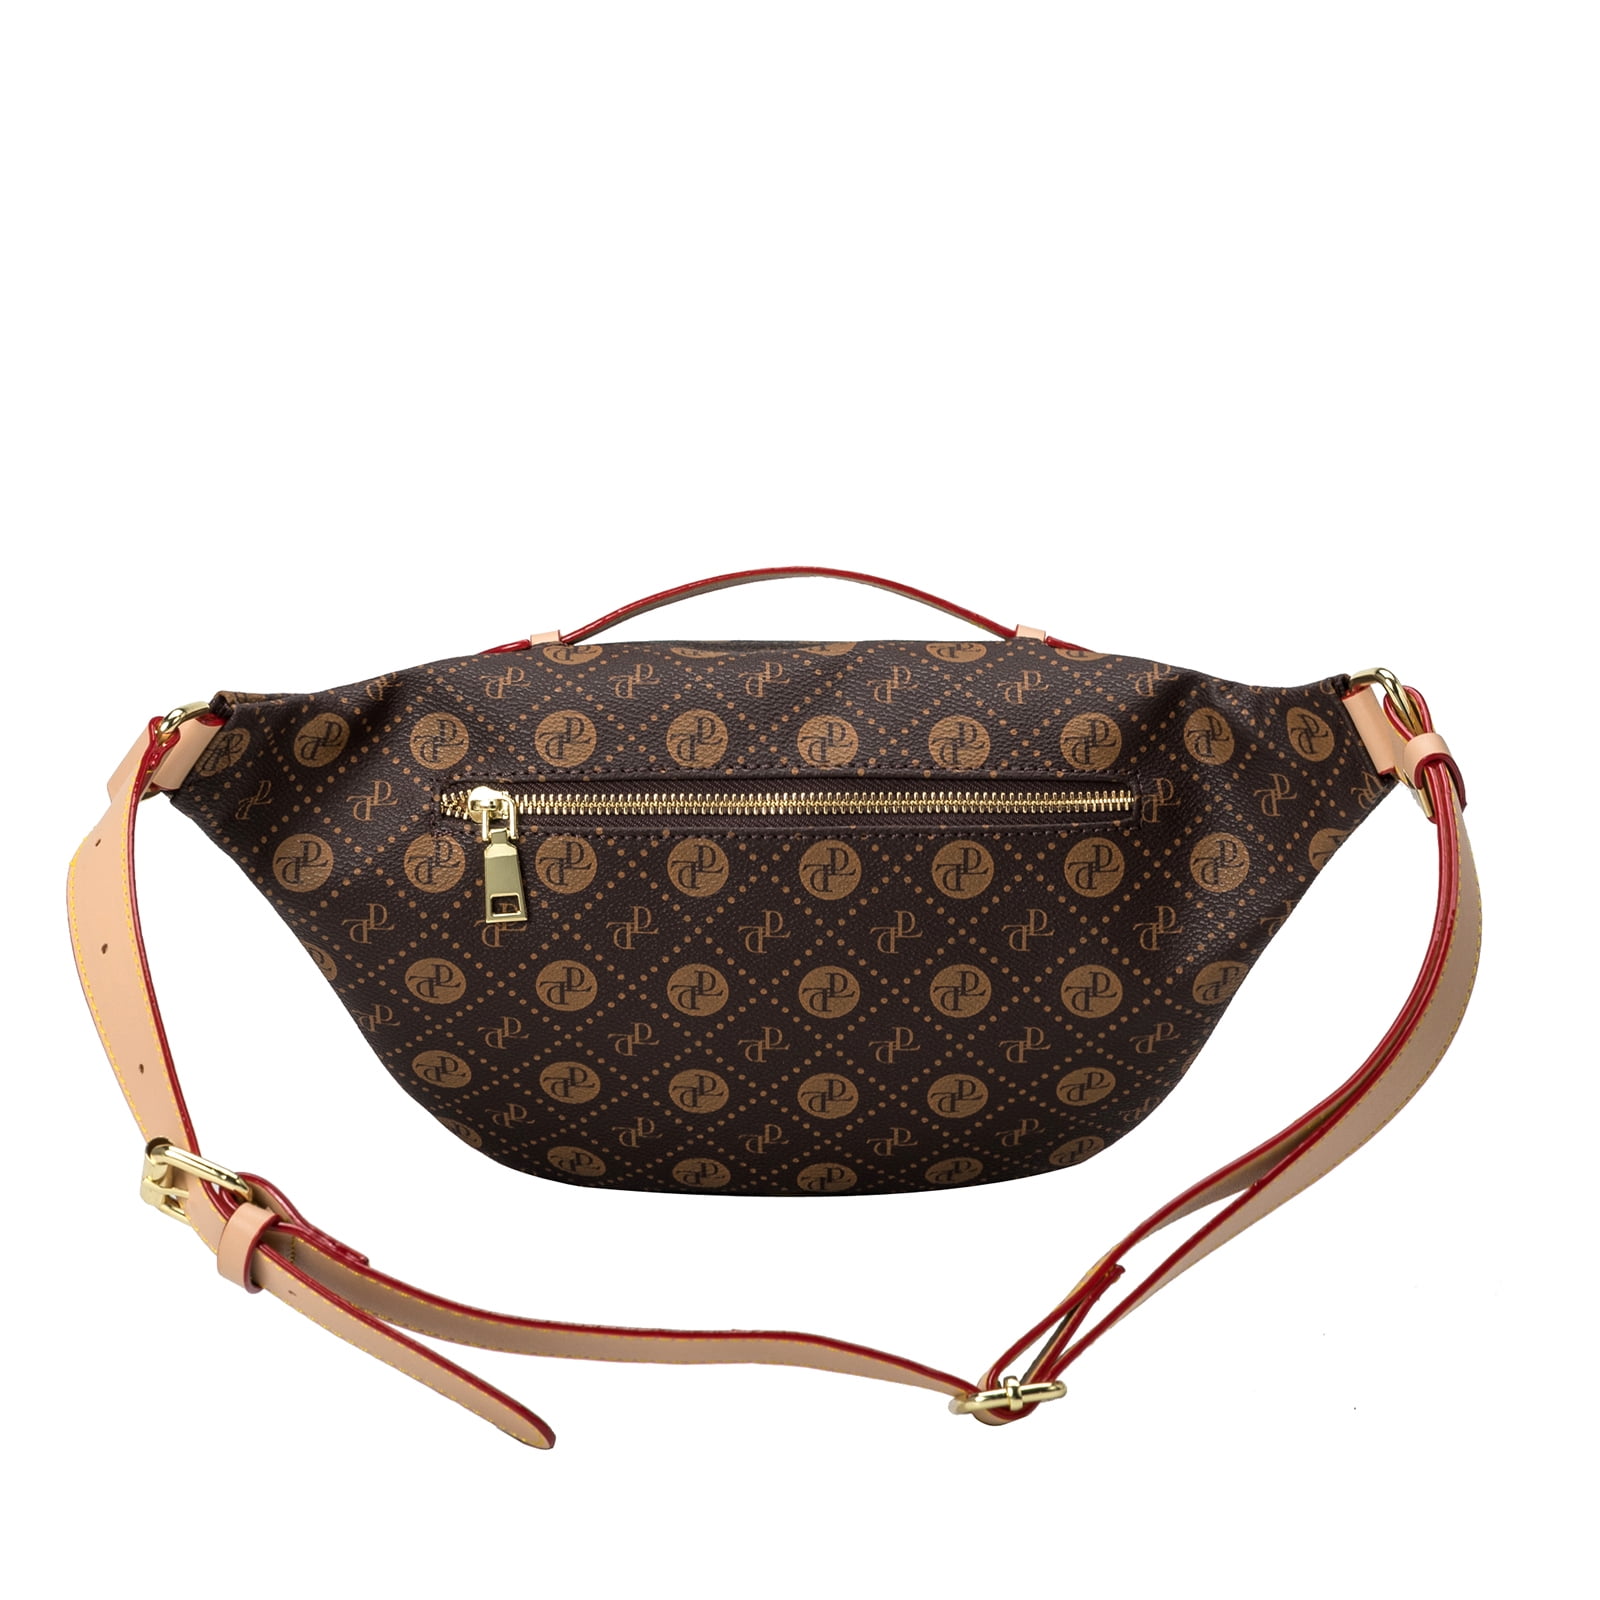 Fashion Look Featuring Louis Vuitton Belt Bags and Louis Vuitton